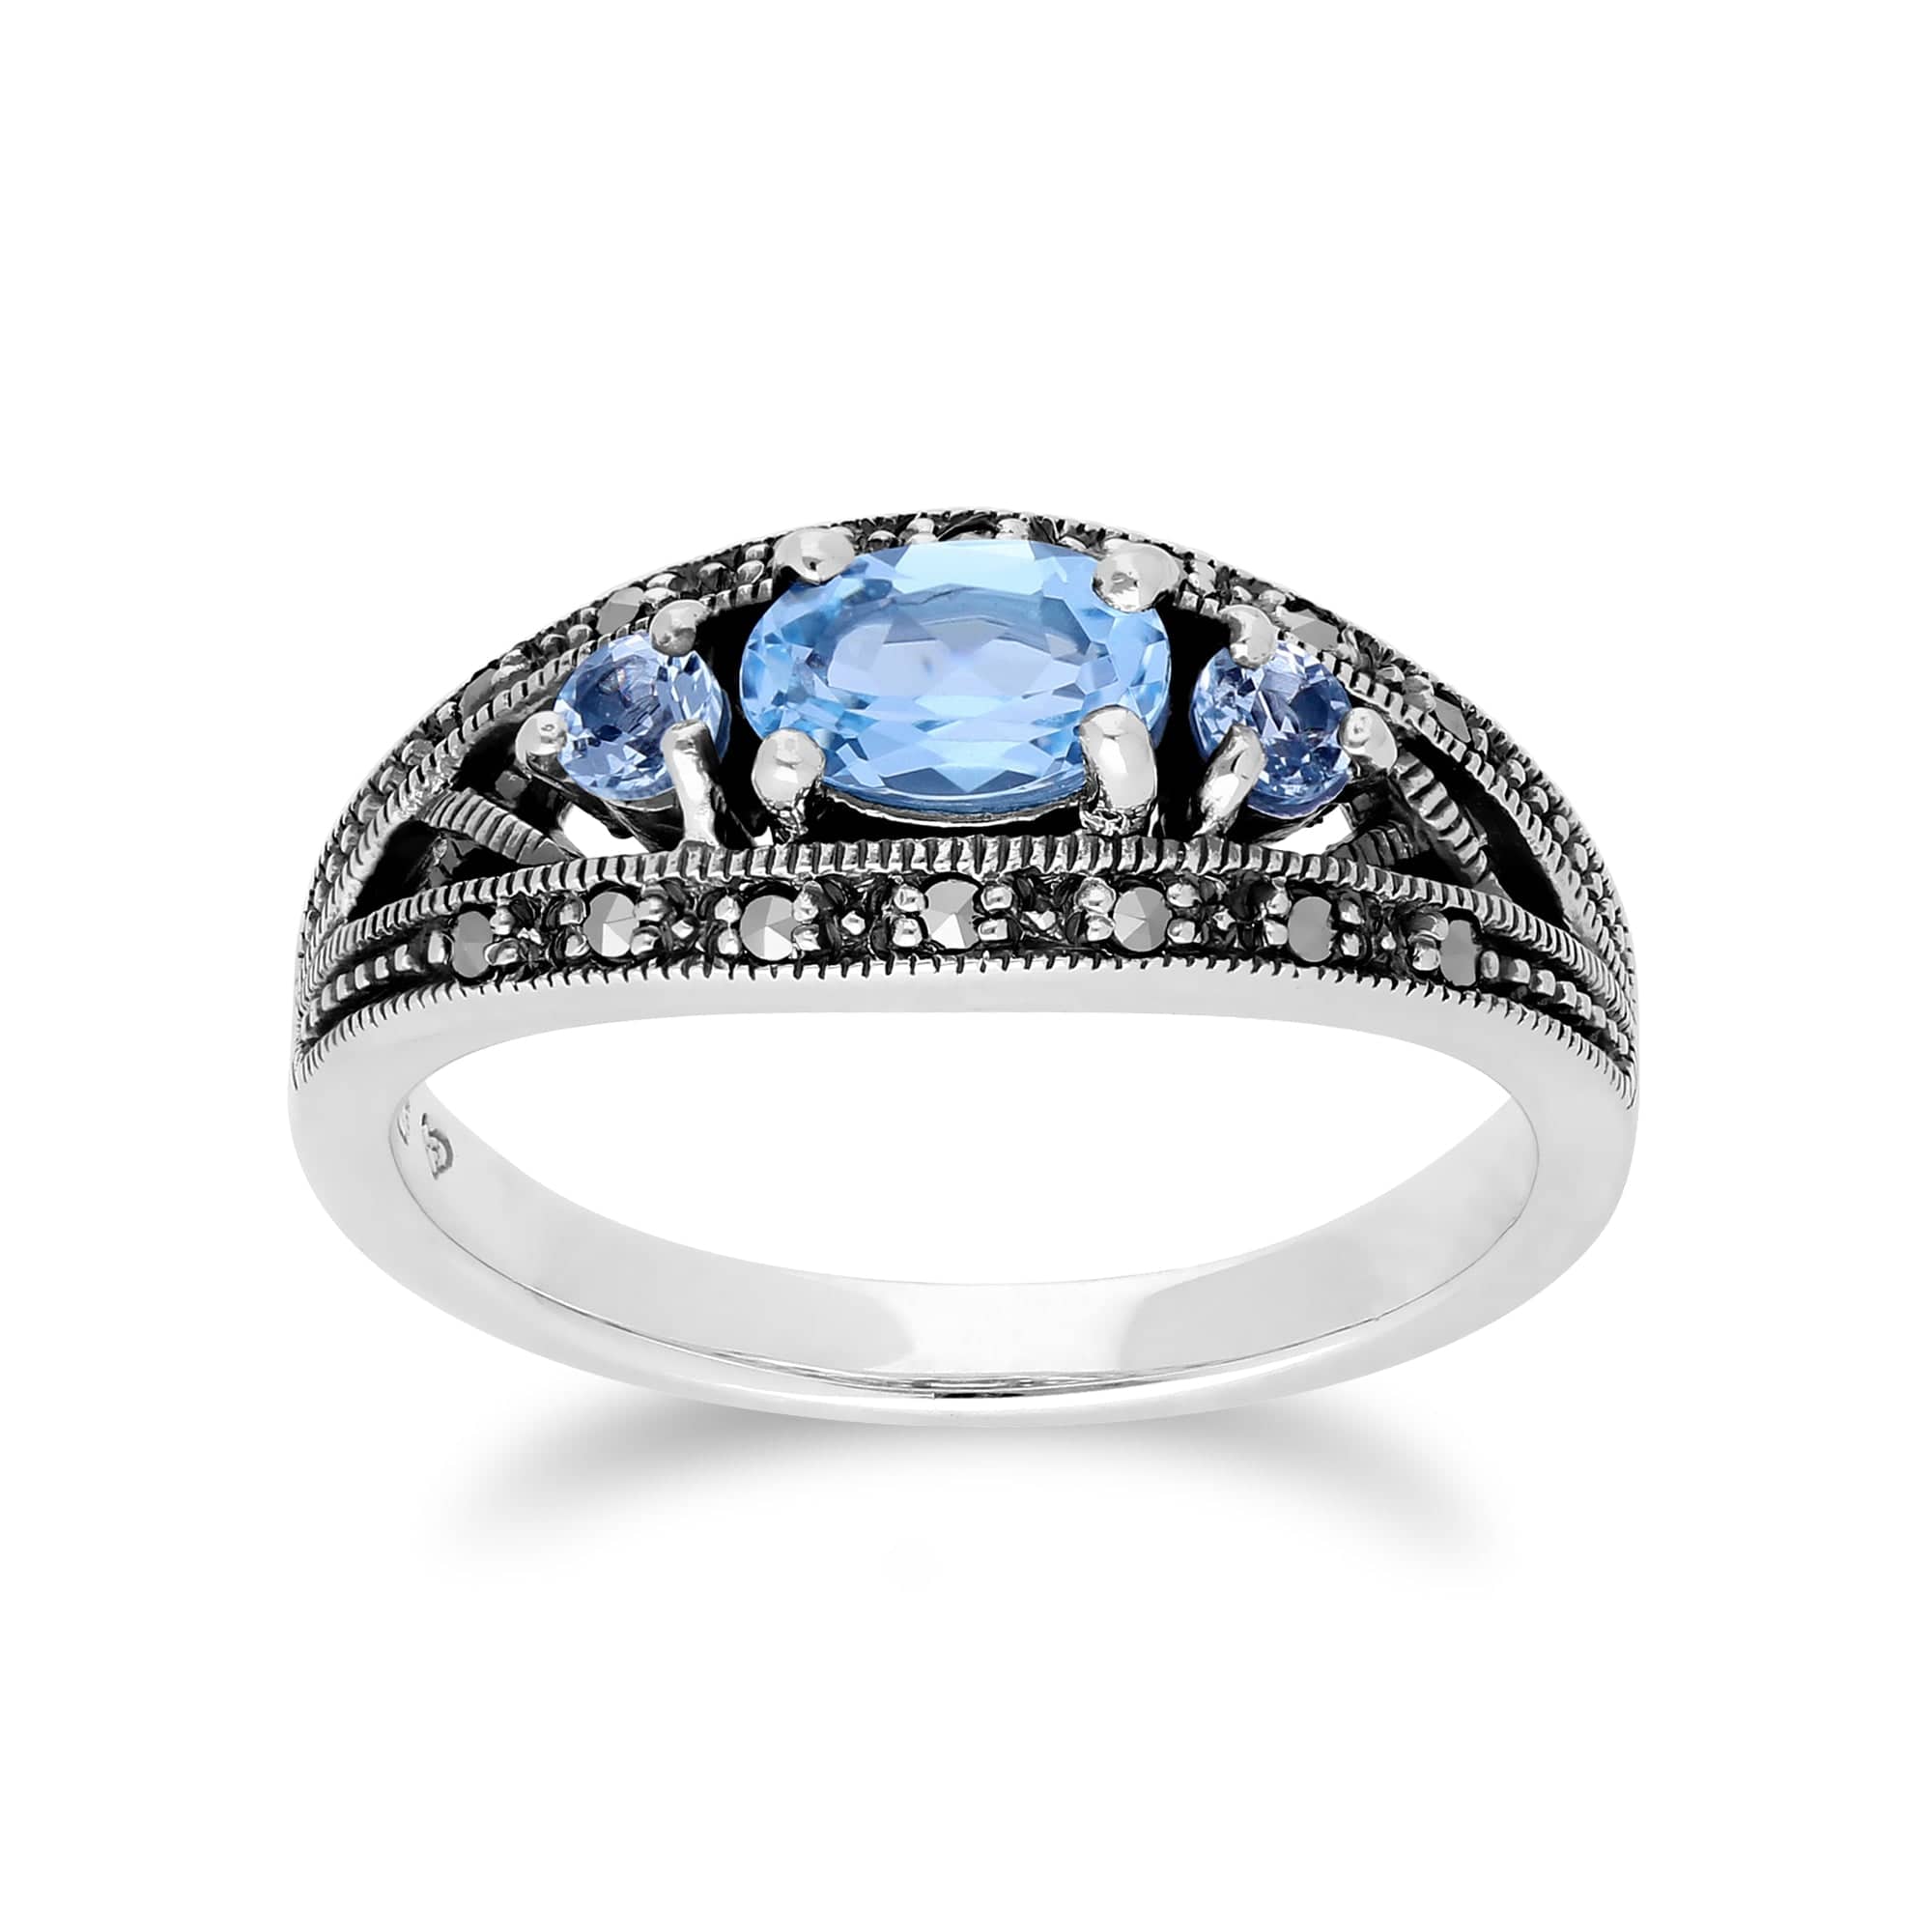 214R424003925 Art Deco Style Oval Blue Topaz & Marcasite Three Stone Ring in 925 Sterling Silver 1